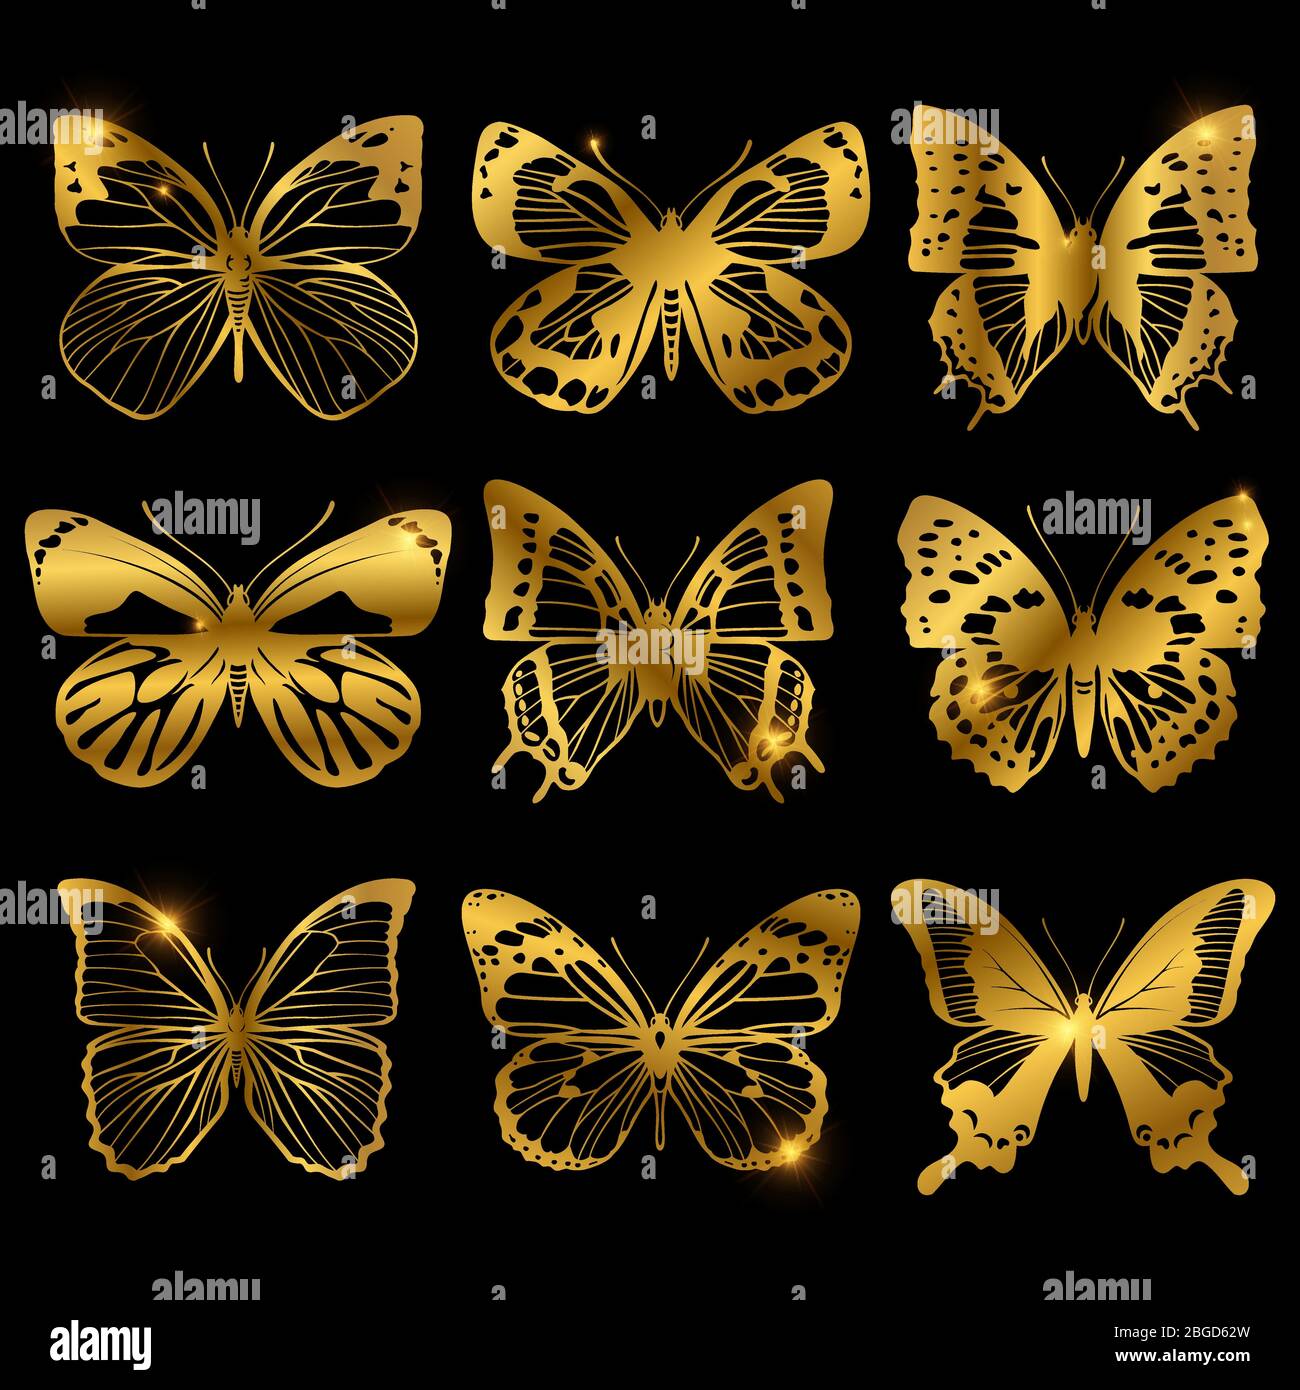 Shiny golden butterflies with light effect. Butterfly collection in shiny golden colored. Vector illustration Stock Vector